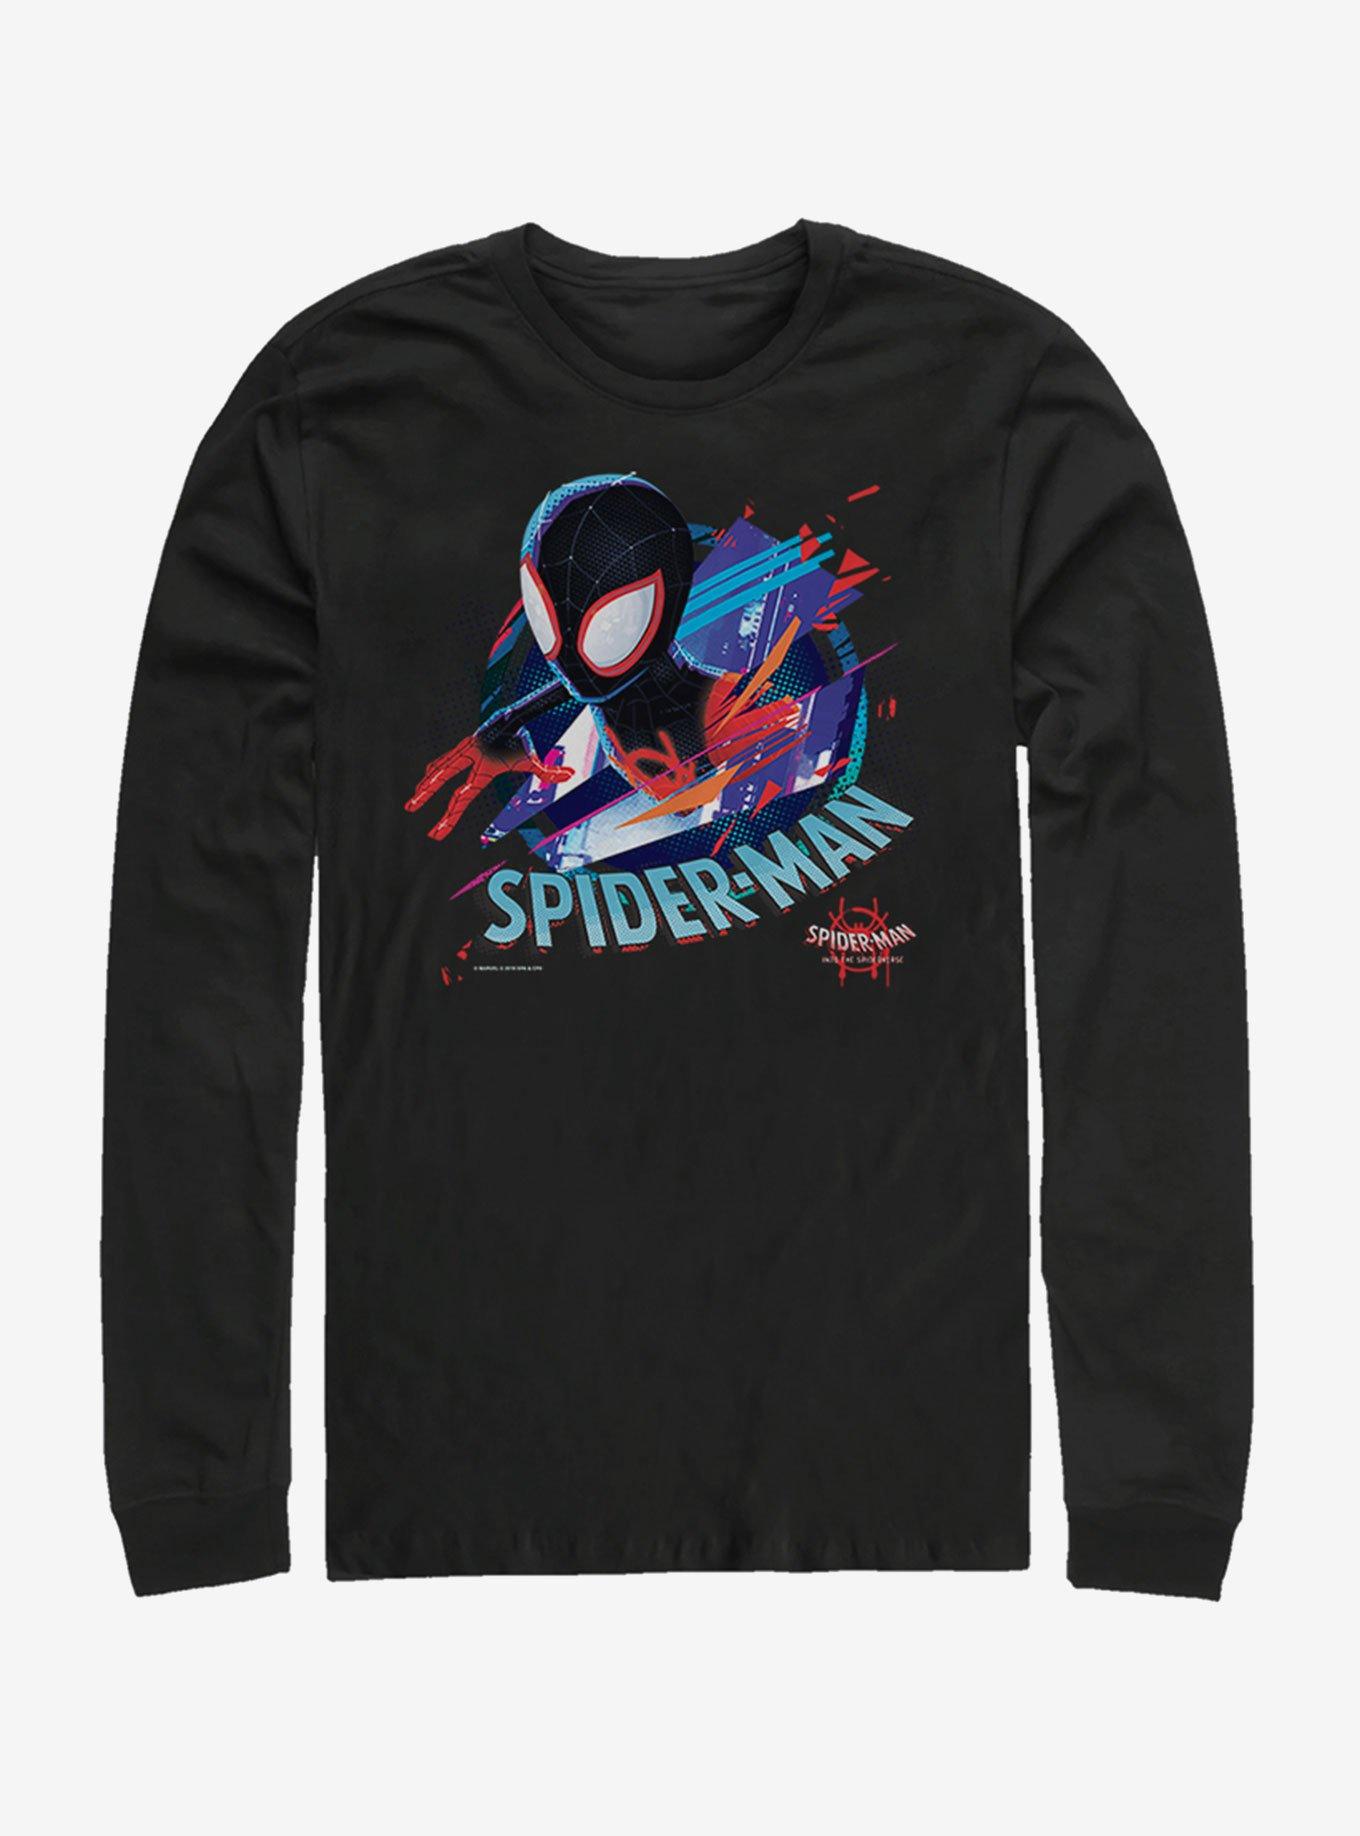 Marvel Spider-Man: Into the Spider-Verse Cracked Spider Womens Long-Sleeve T-Shirt, BLACK, hi-res